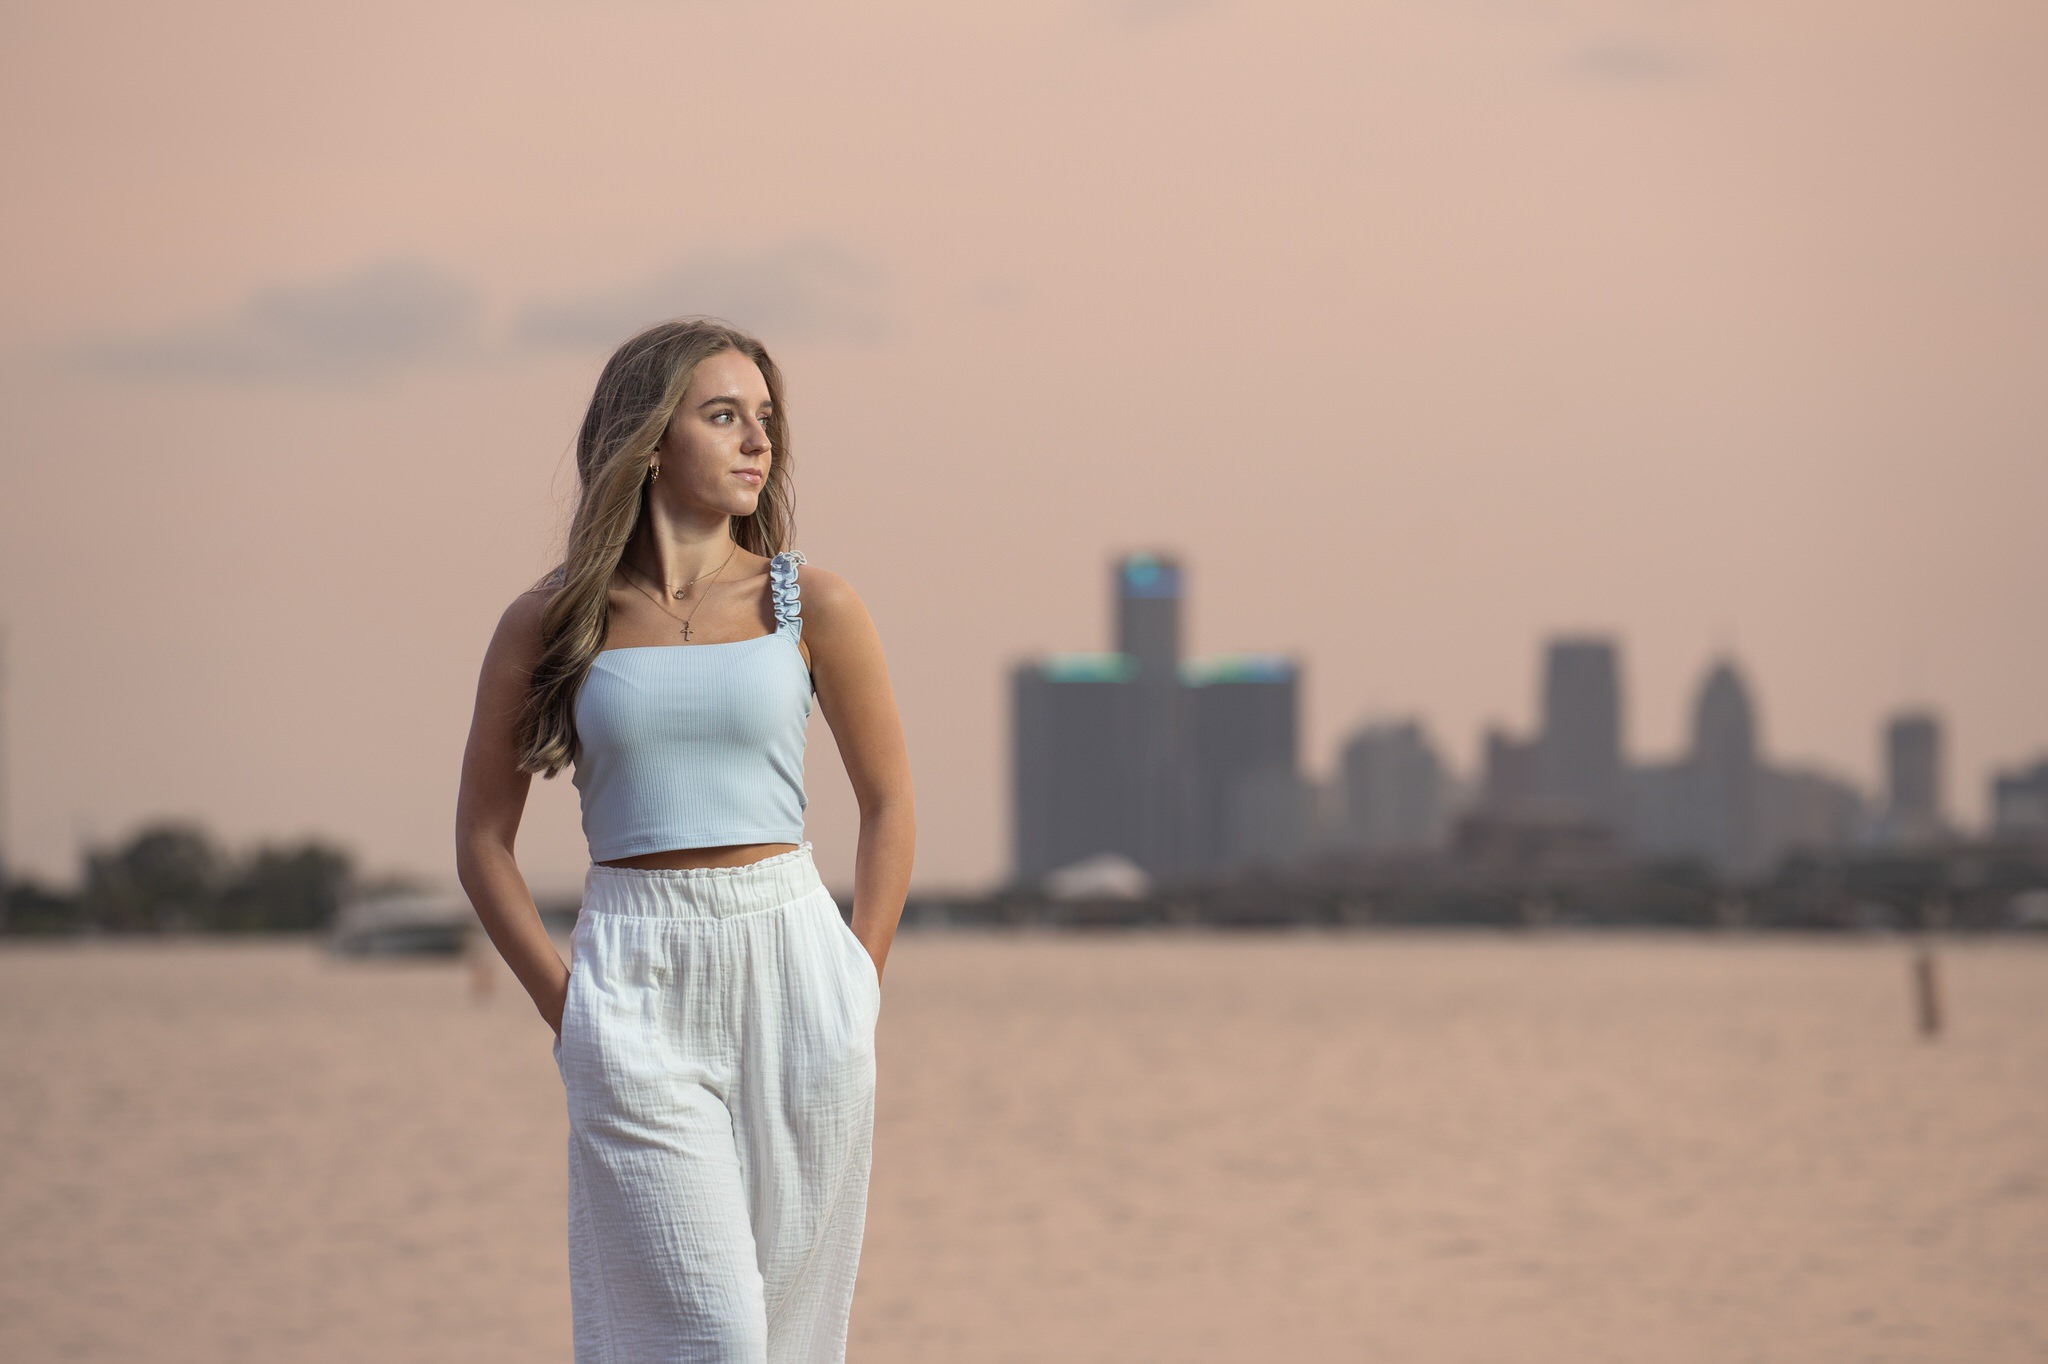 Senior photos taken at sunset on Belle Isle with the Detroit skyline in the background. 